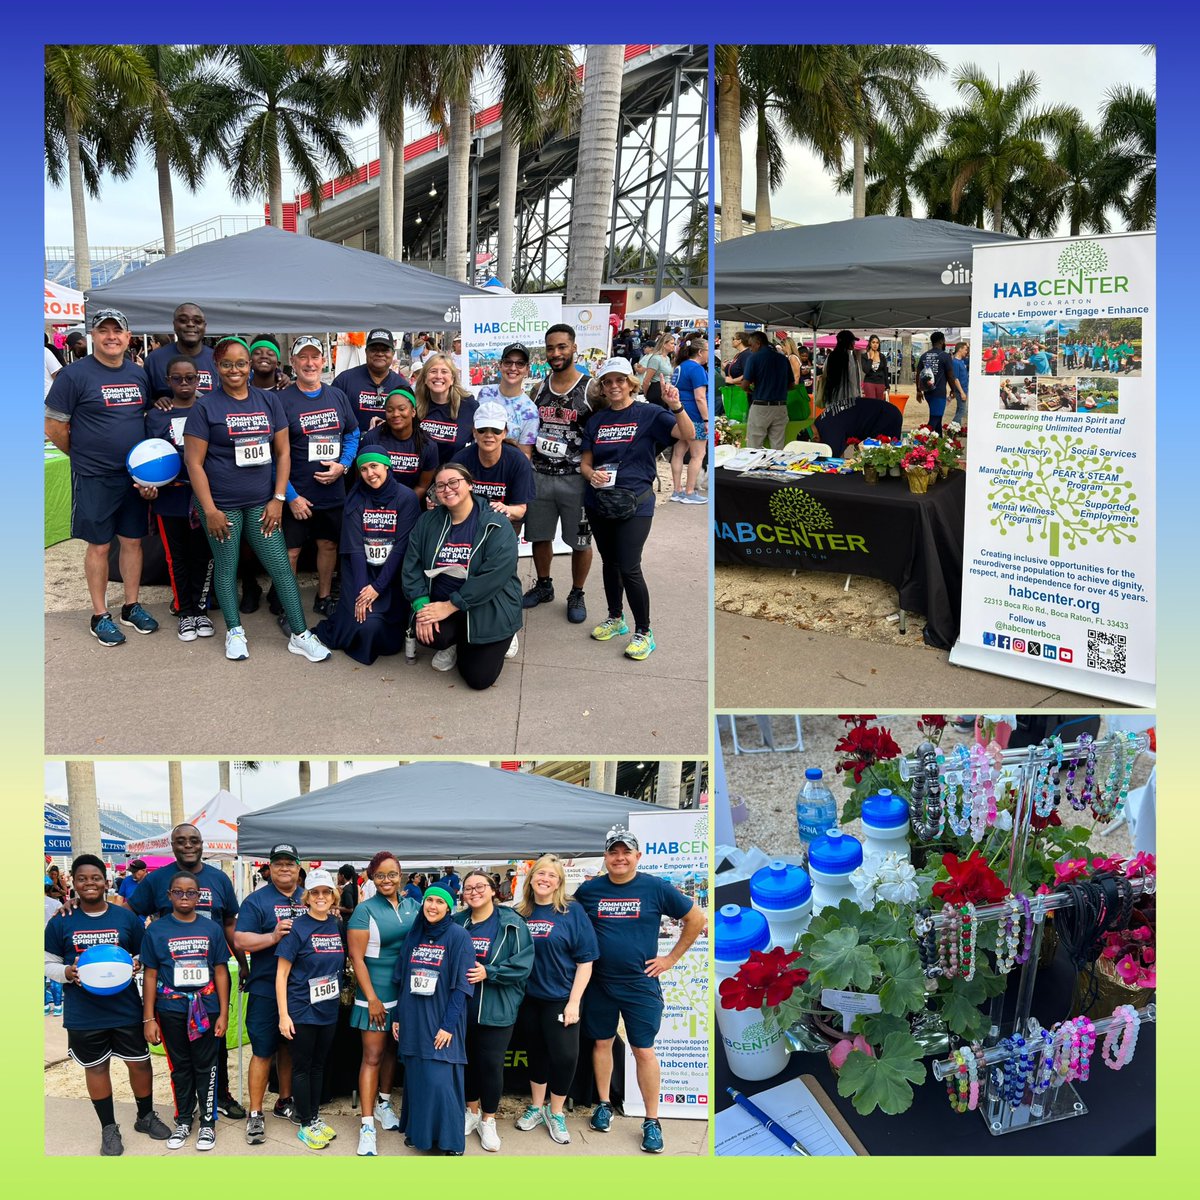 We participated at the Community Spirit Race, a wonderful collaborative community fundraising event managed by Spirit of Giving. It was encouraging to see countless nonprofits & compassionate individuals coming together to champion positive impact and change within our community.